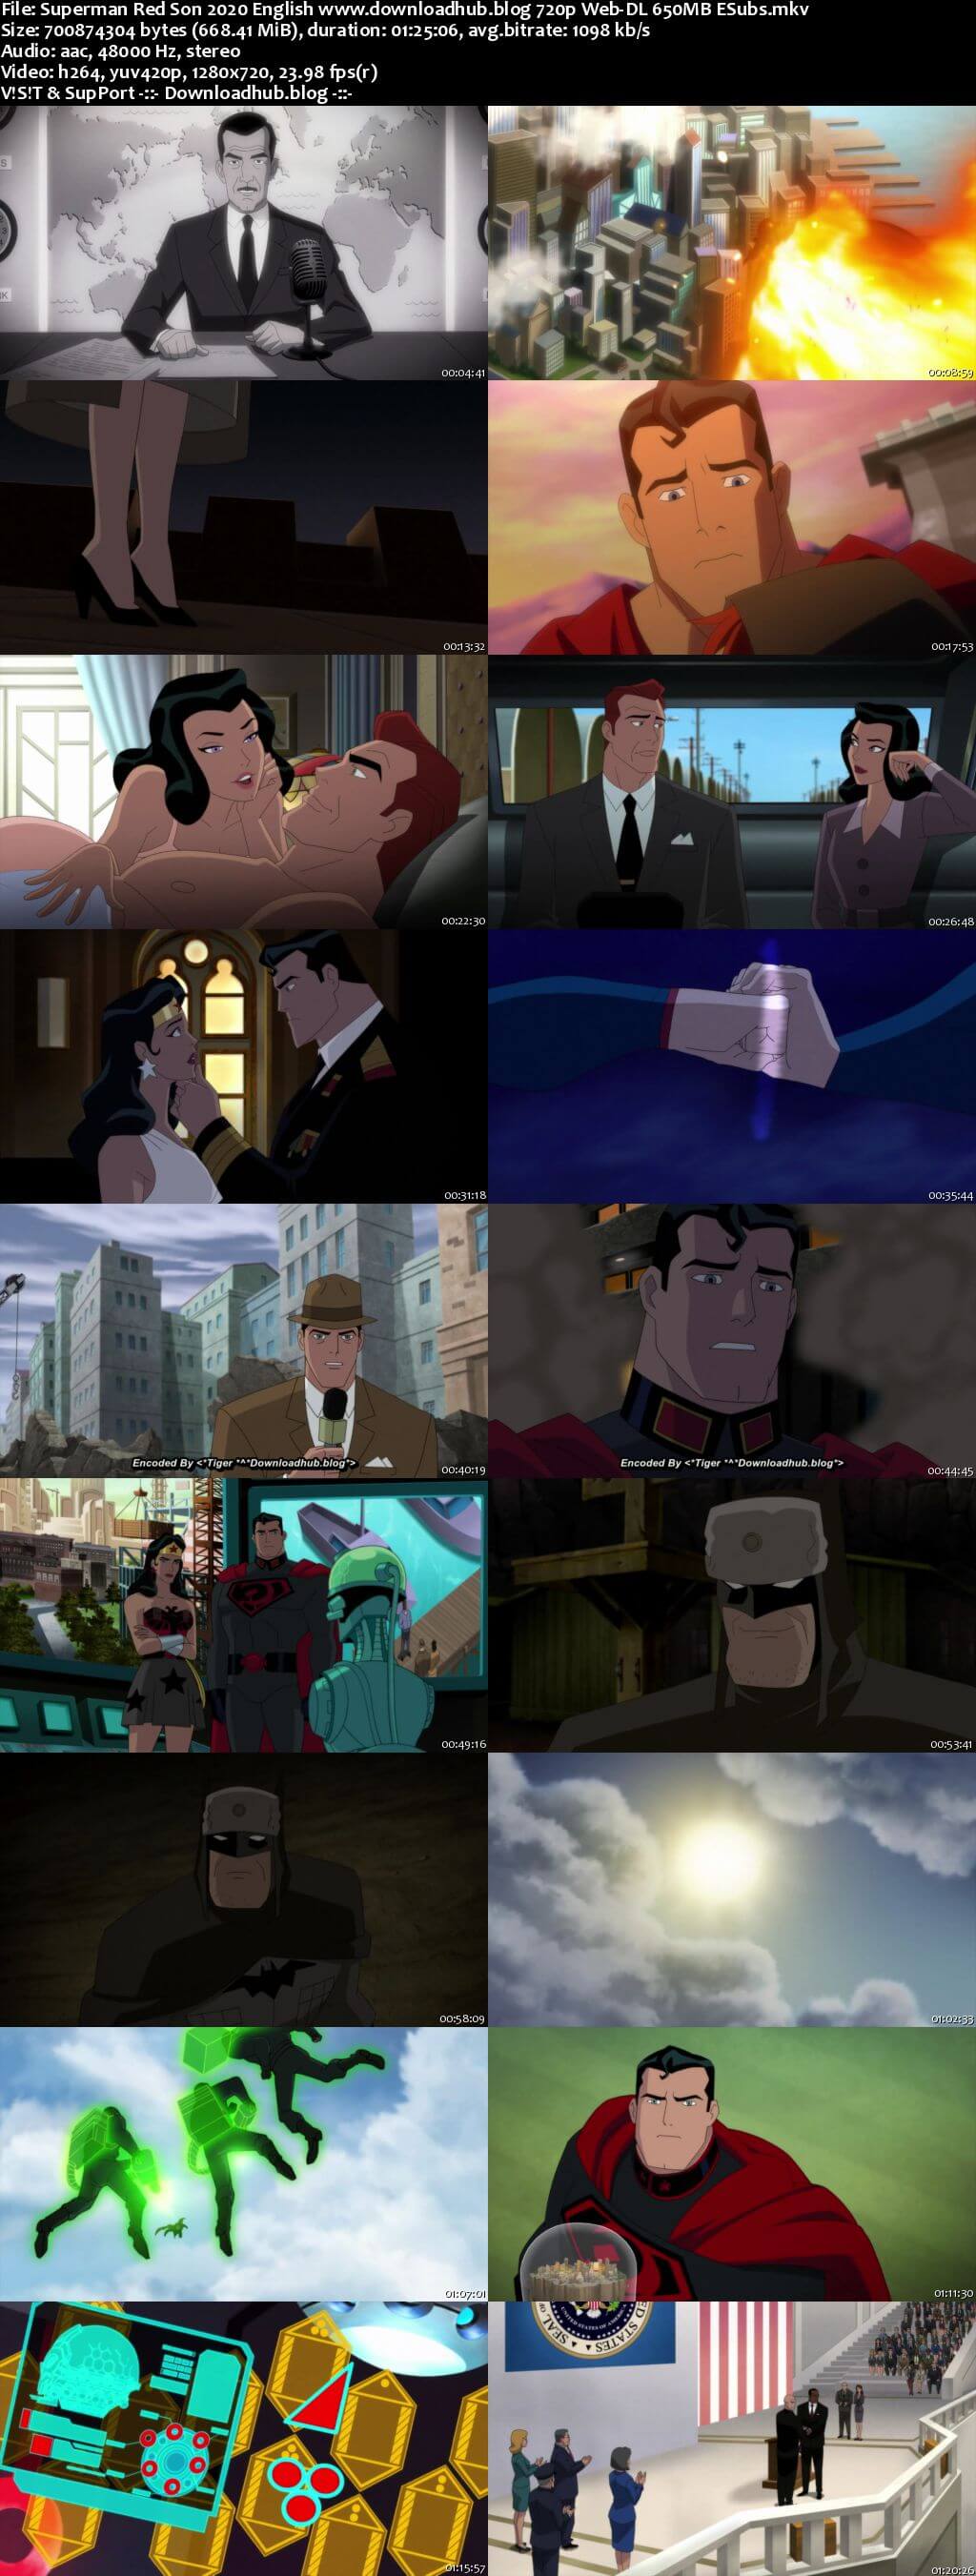 Superman Red Son 2020 English 720p Web-DL 650MB ESubs